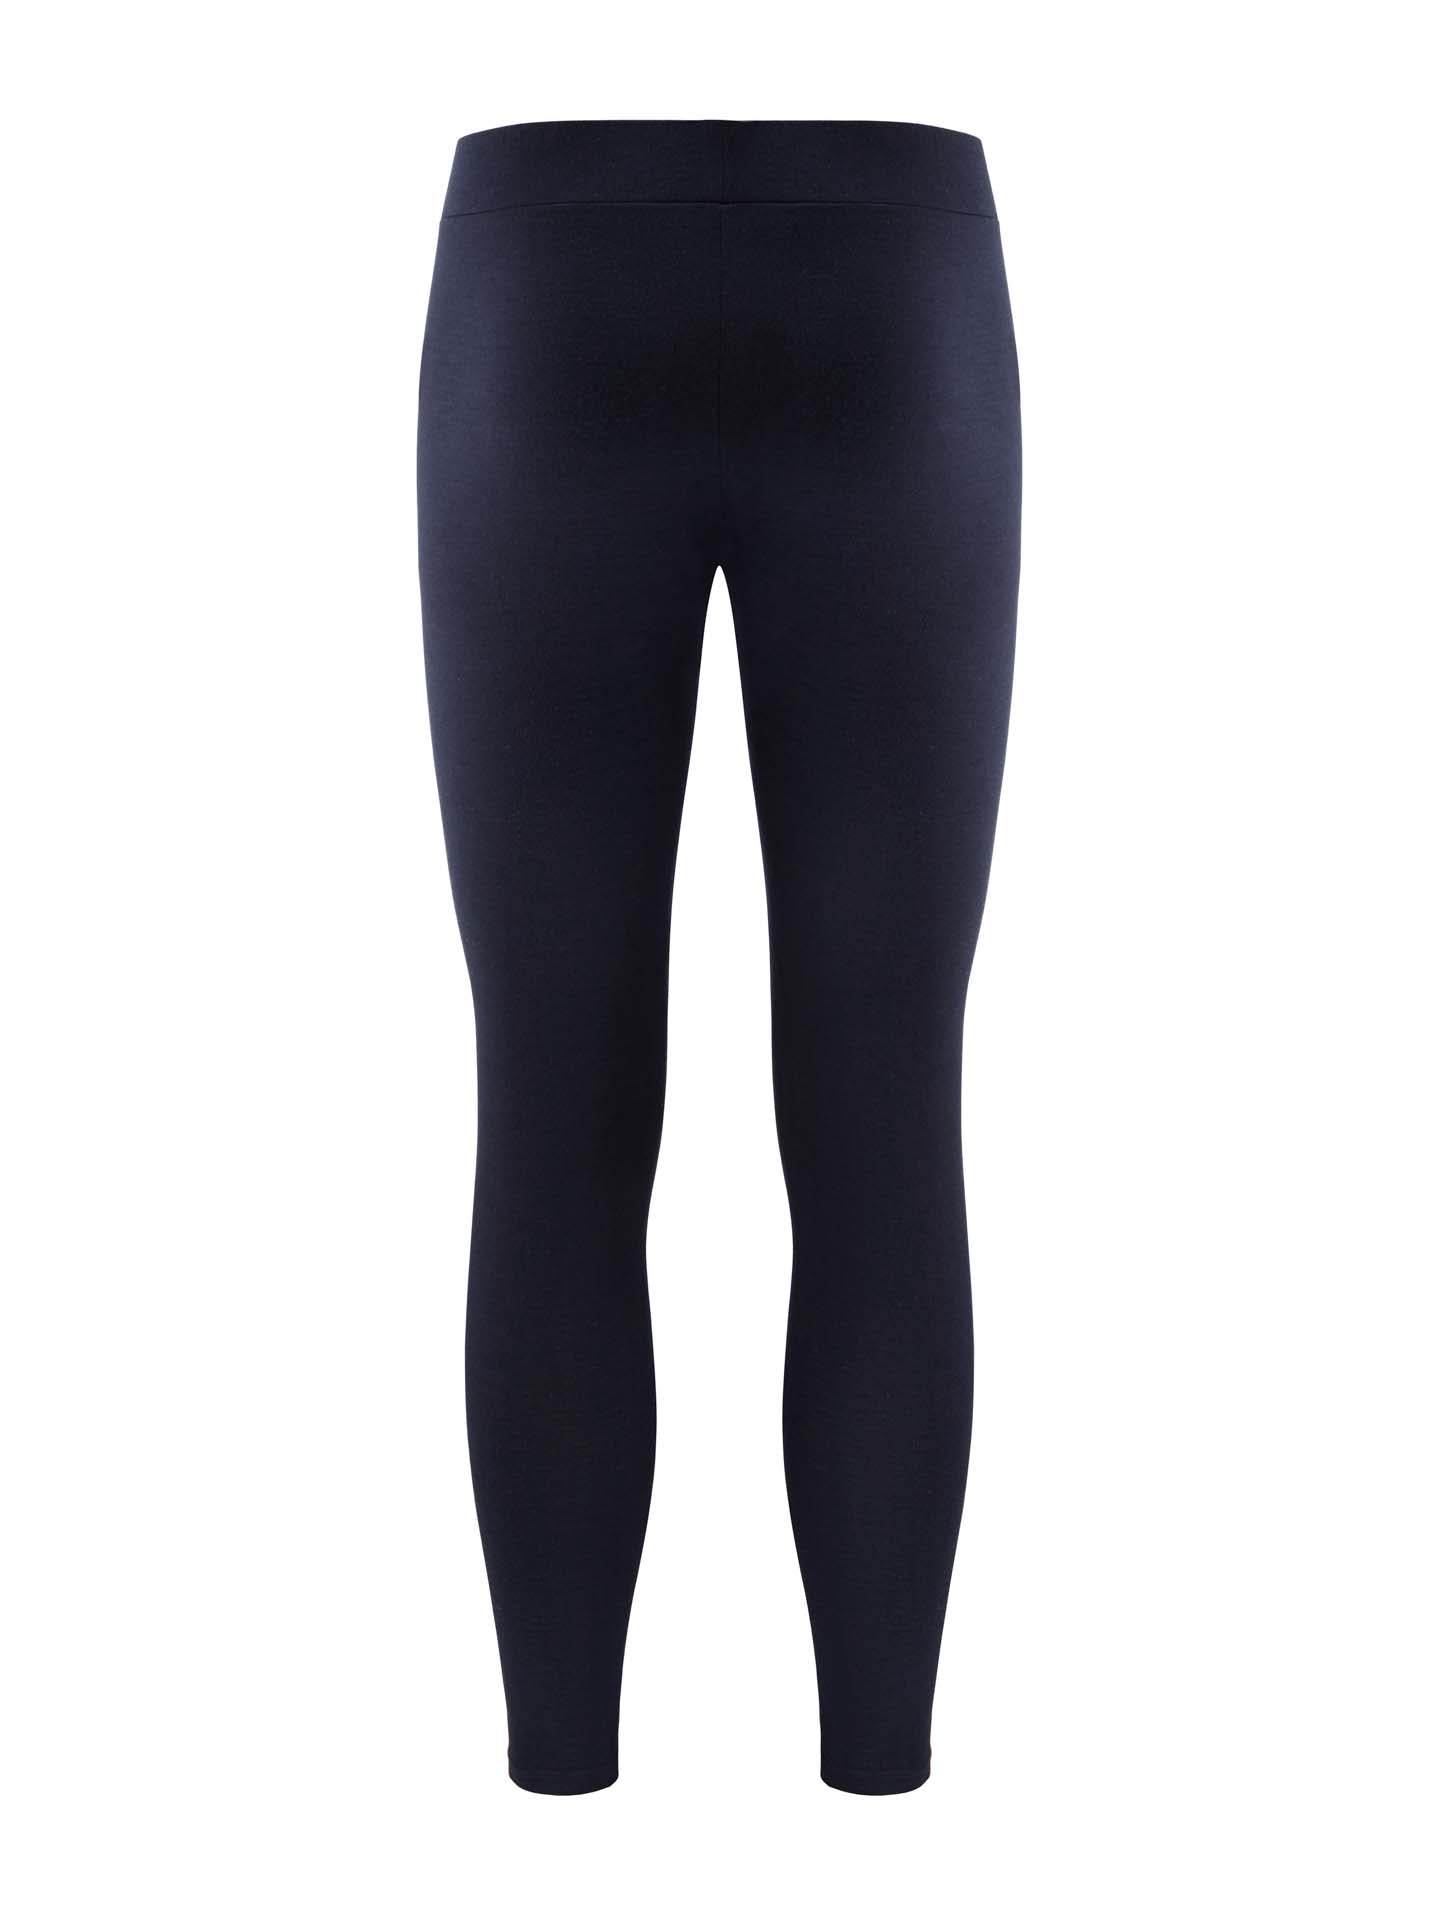 Help me decide! I wanted a thicker pair of navy leggings. Here are  instills, navy size 0. Compared with the rainiers in seaweed green size xxs.  Wondering if the rainiers look better